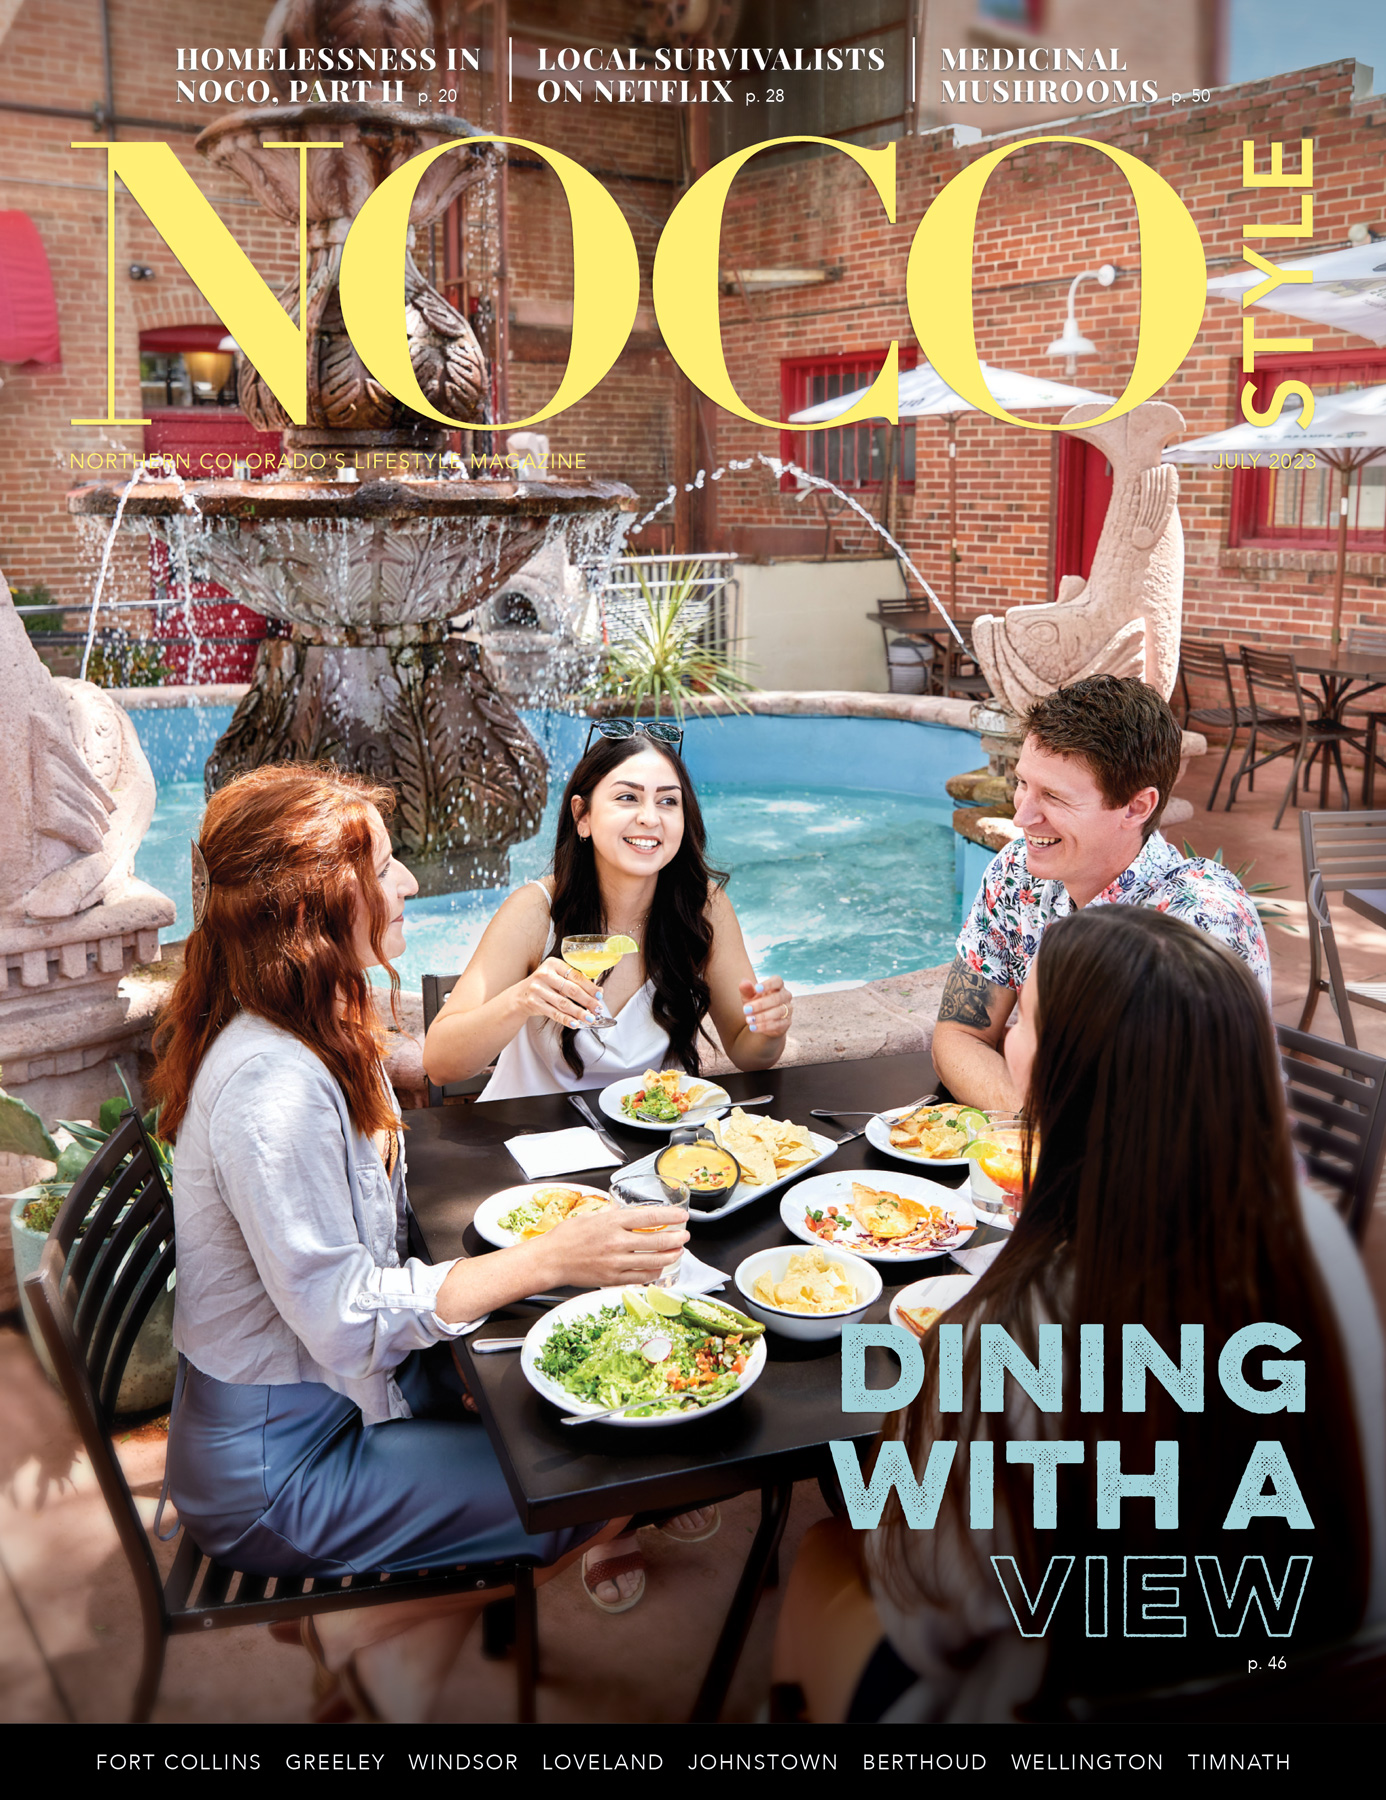 Cover of NOCO Style magazine featuring diners on a summer patio - John Robson Editorial Photography